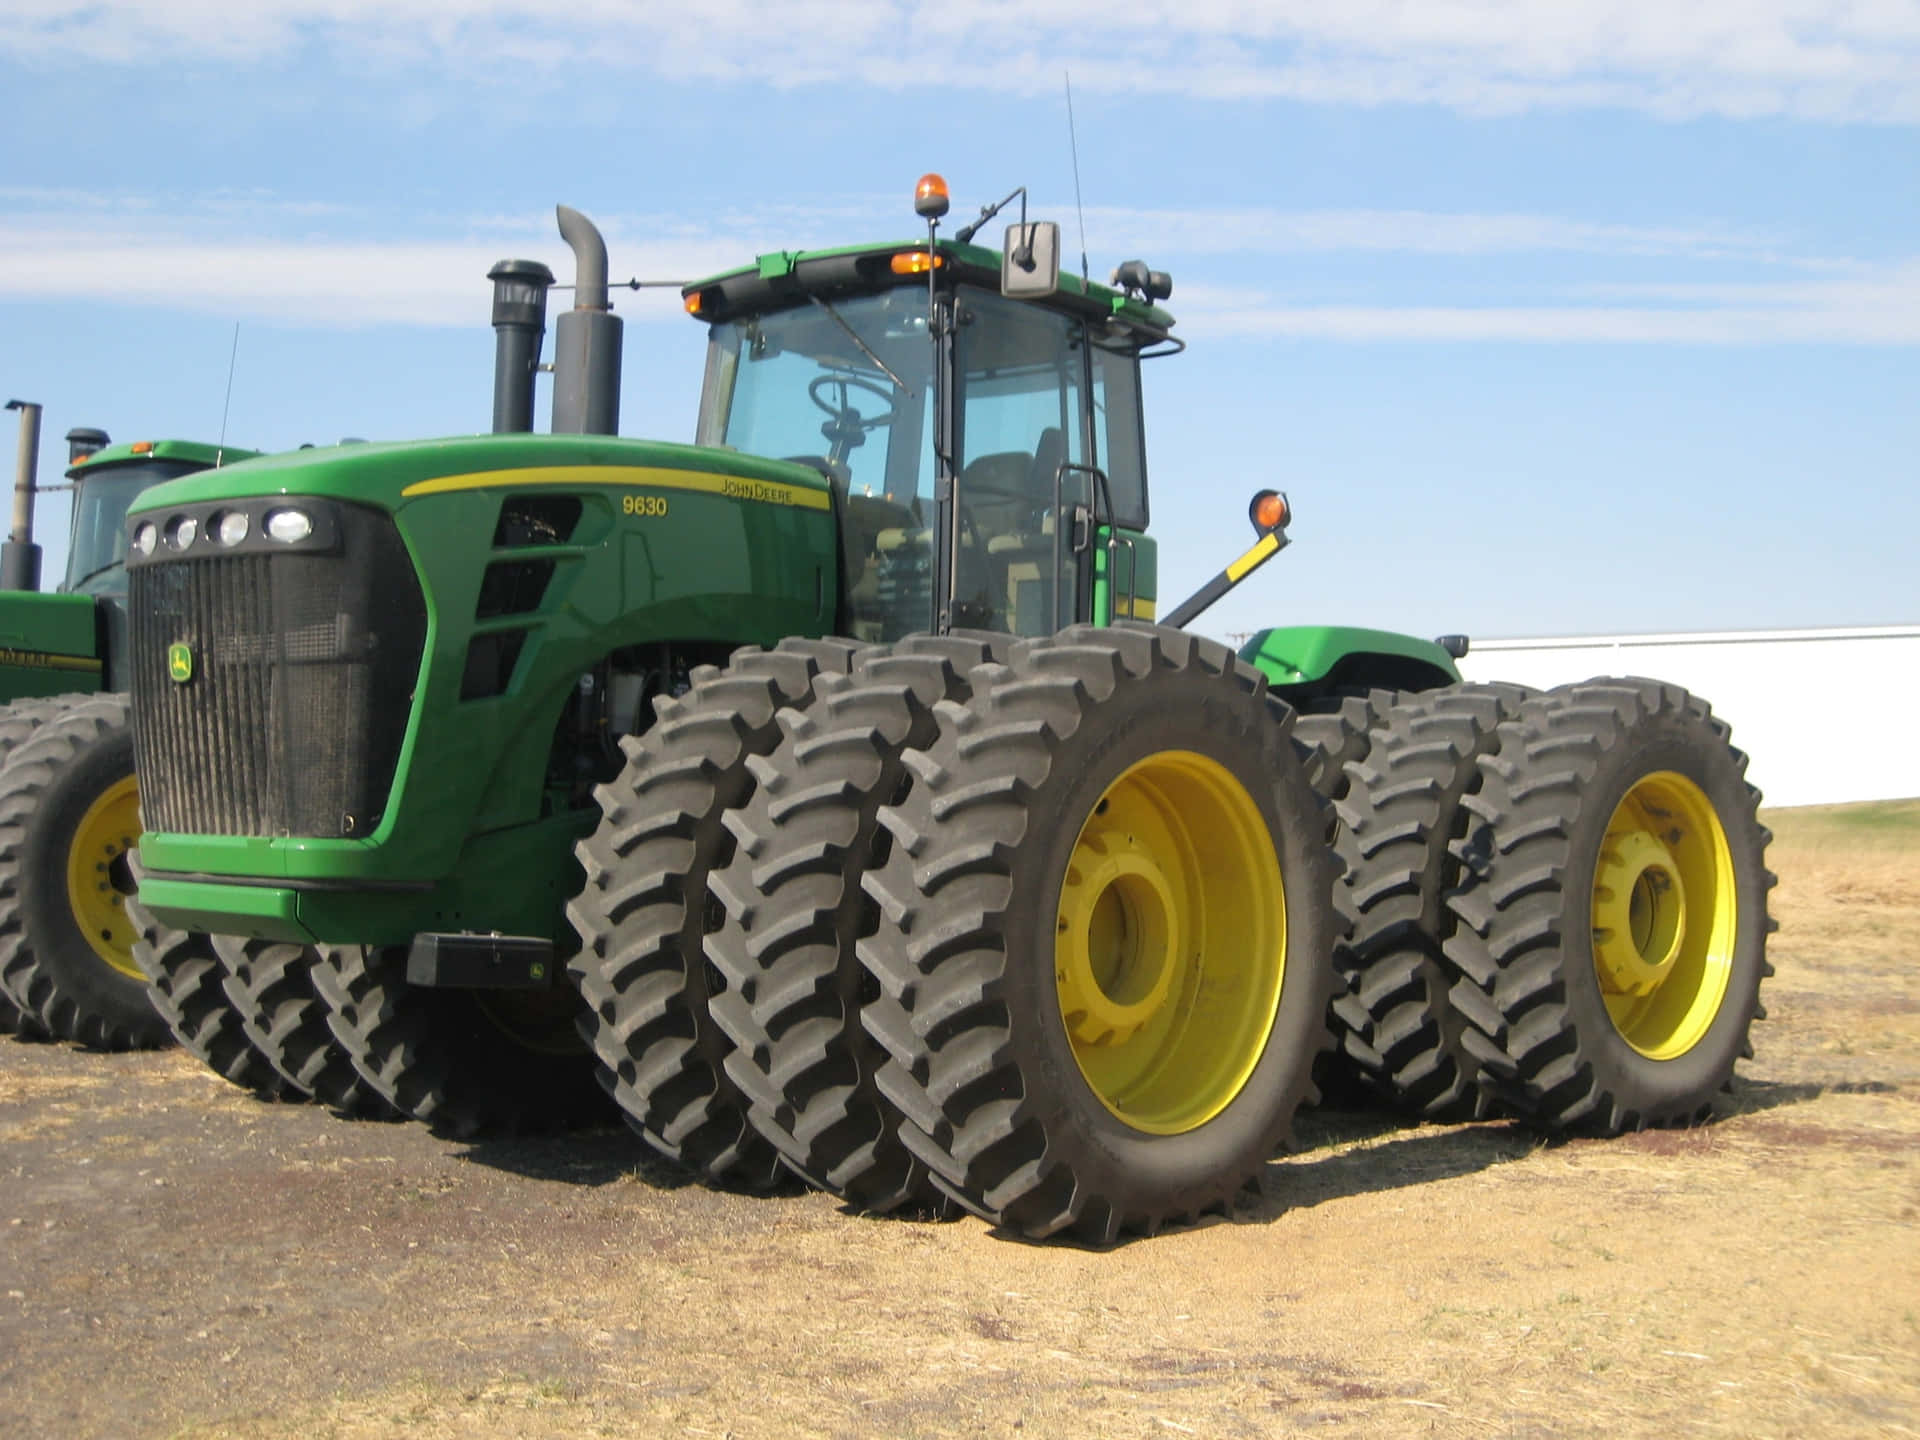 Double Wheel Tractor Picture